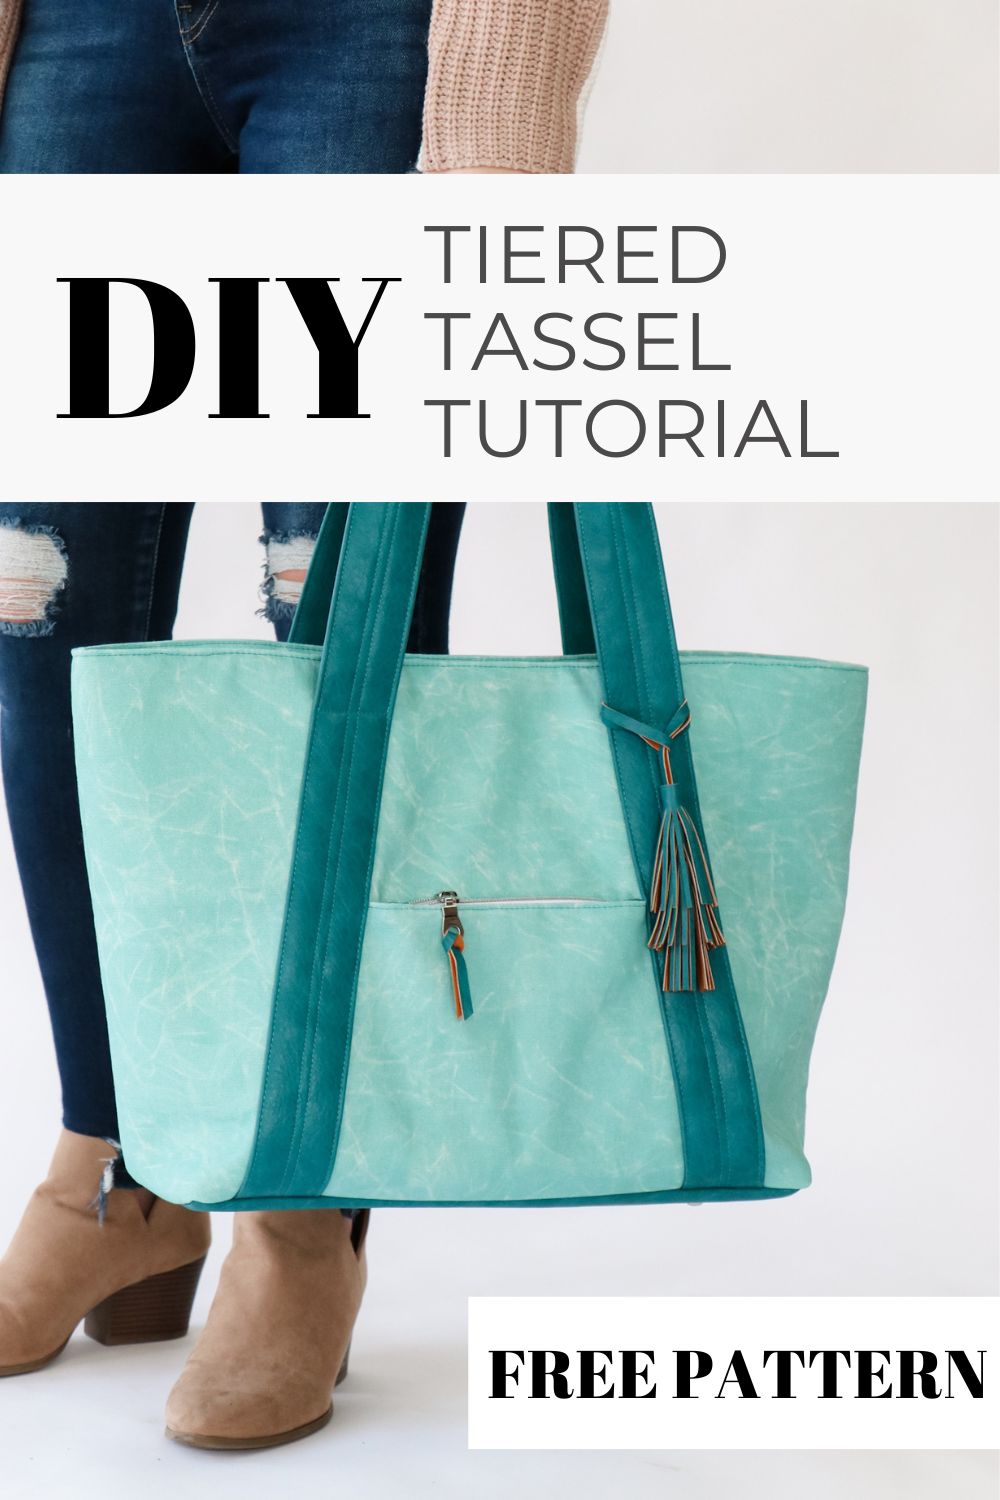 Make Your Own Tiered Tassel Tutorial | No-Sew Bag Accessory!